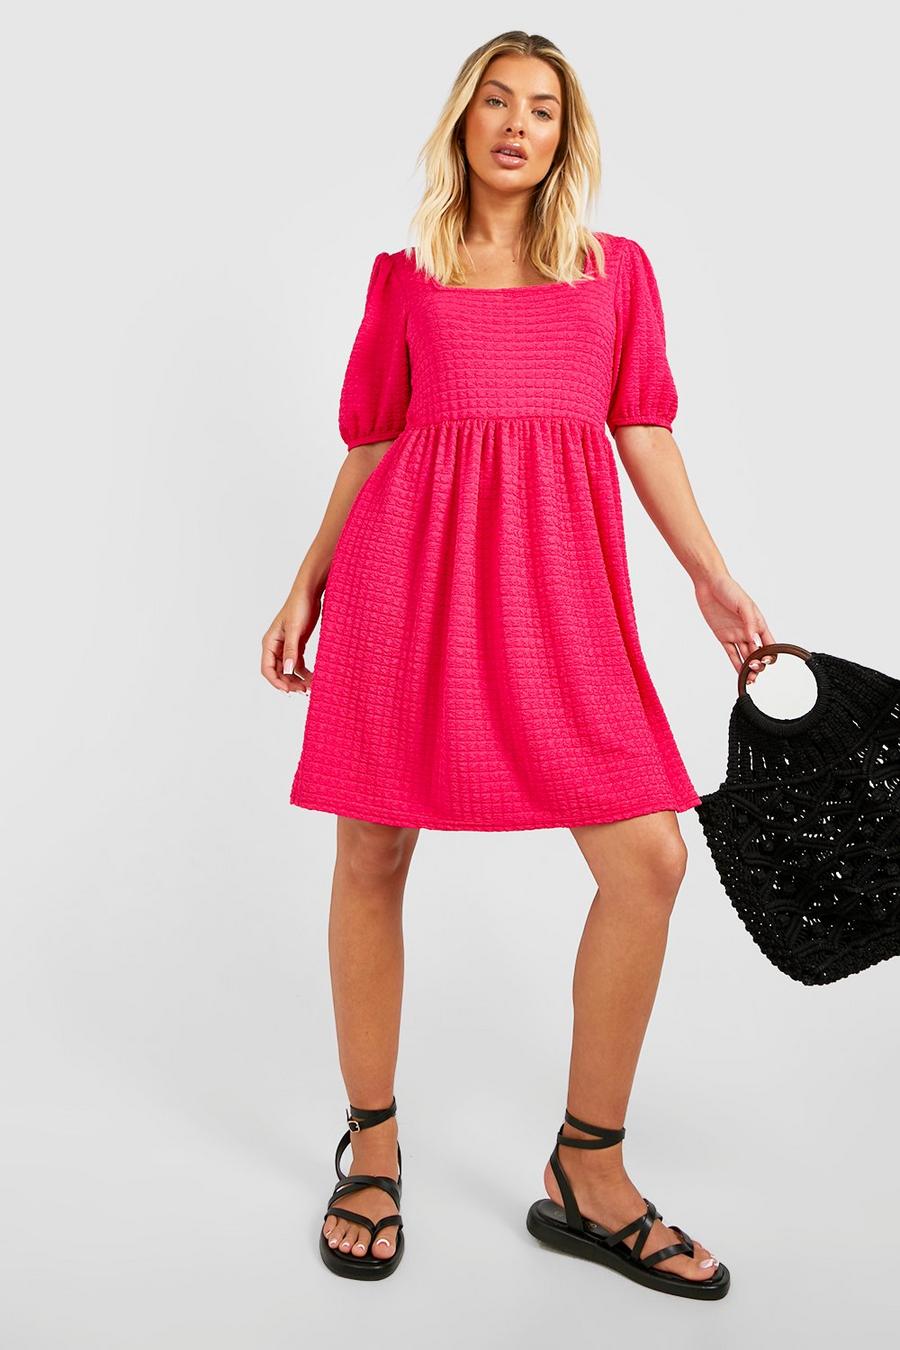 Hot pink Textured Bubble Puff Sleeve Smock Dress